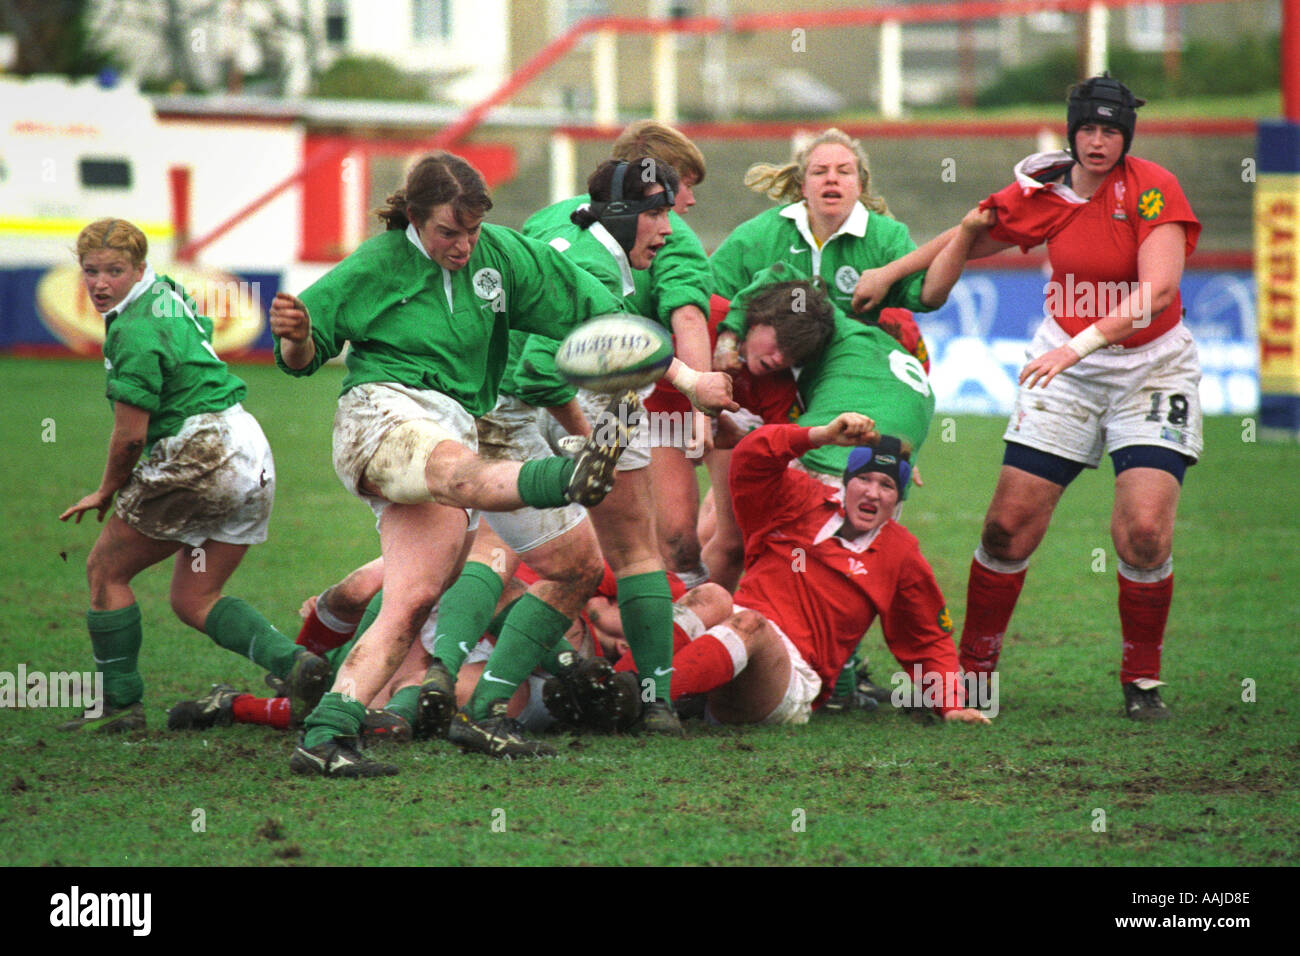 Womens rugby match Wales v Ireland at Llanelli Wales UK Stock Photo